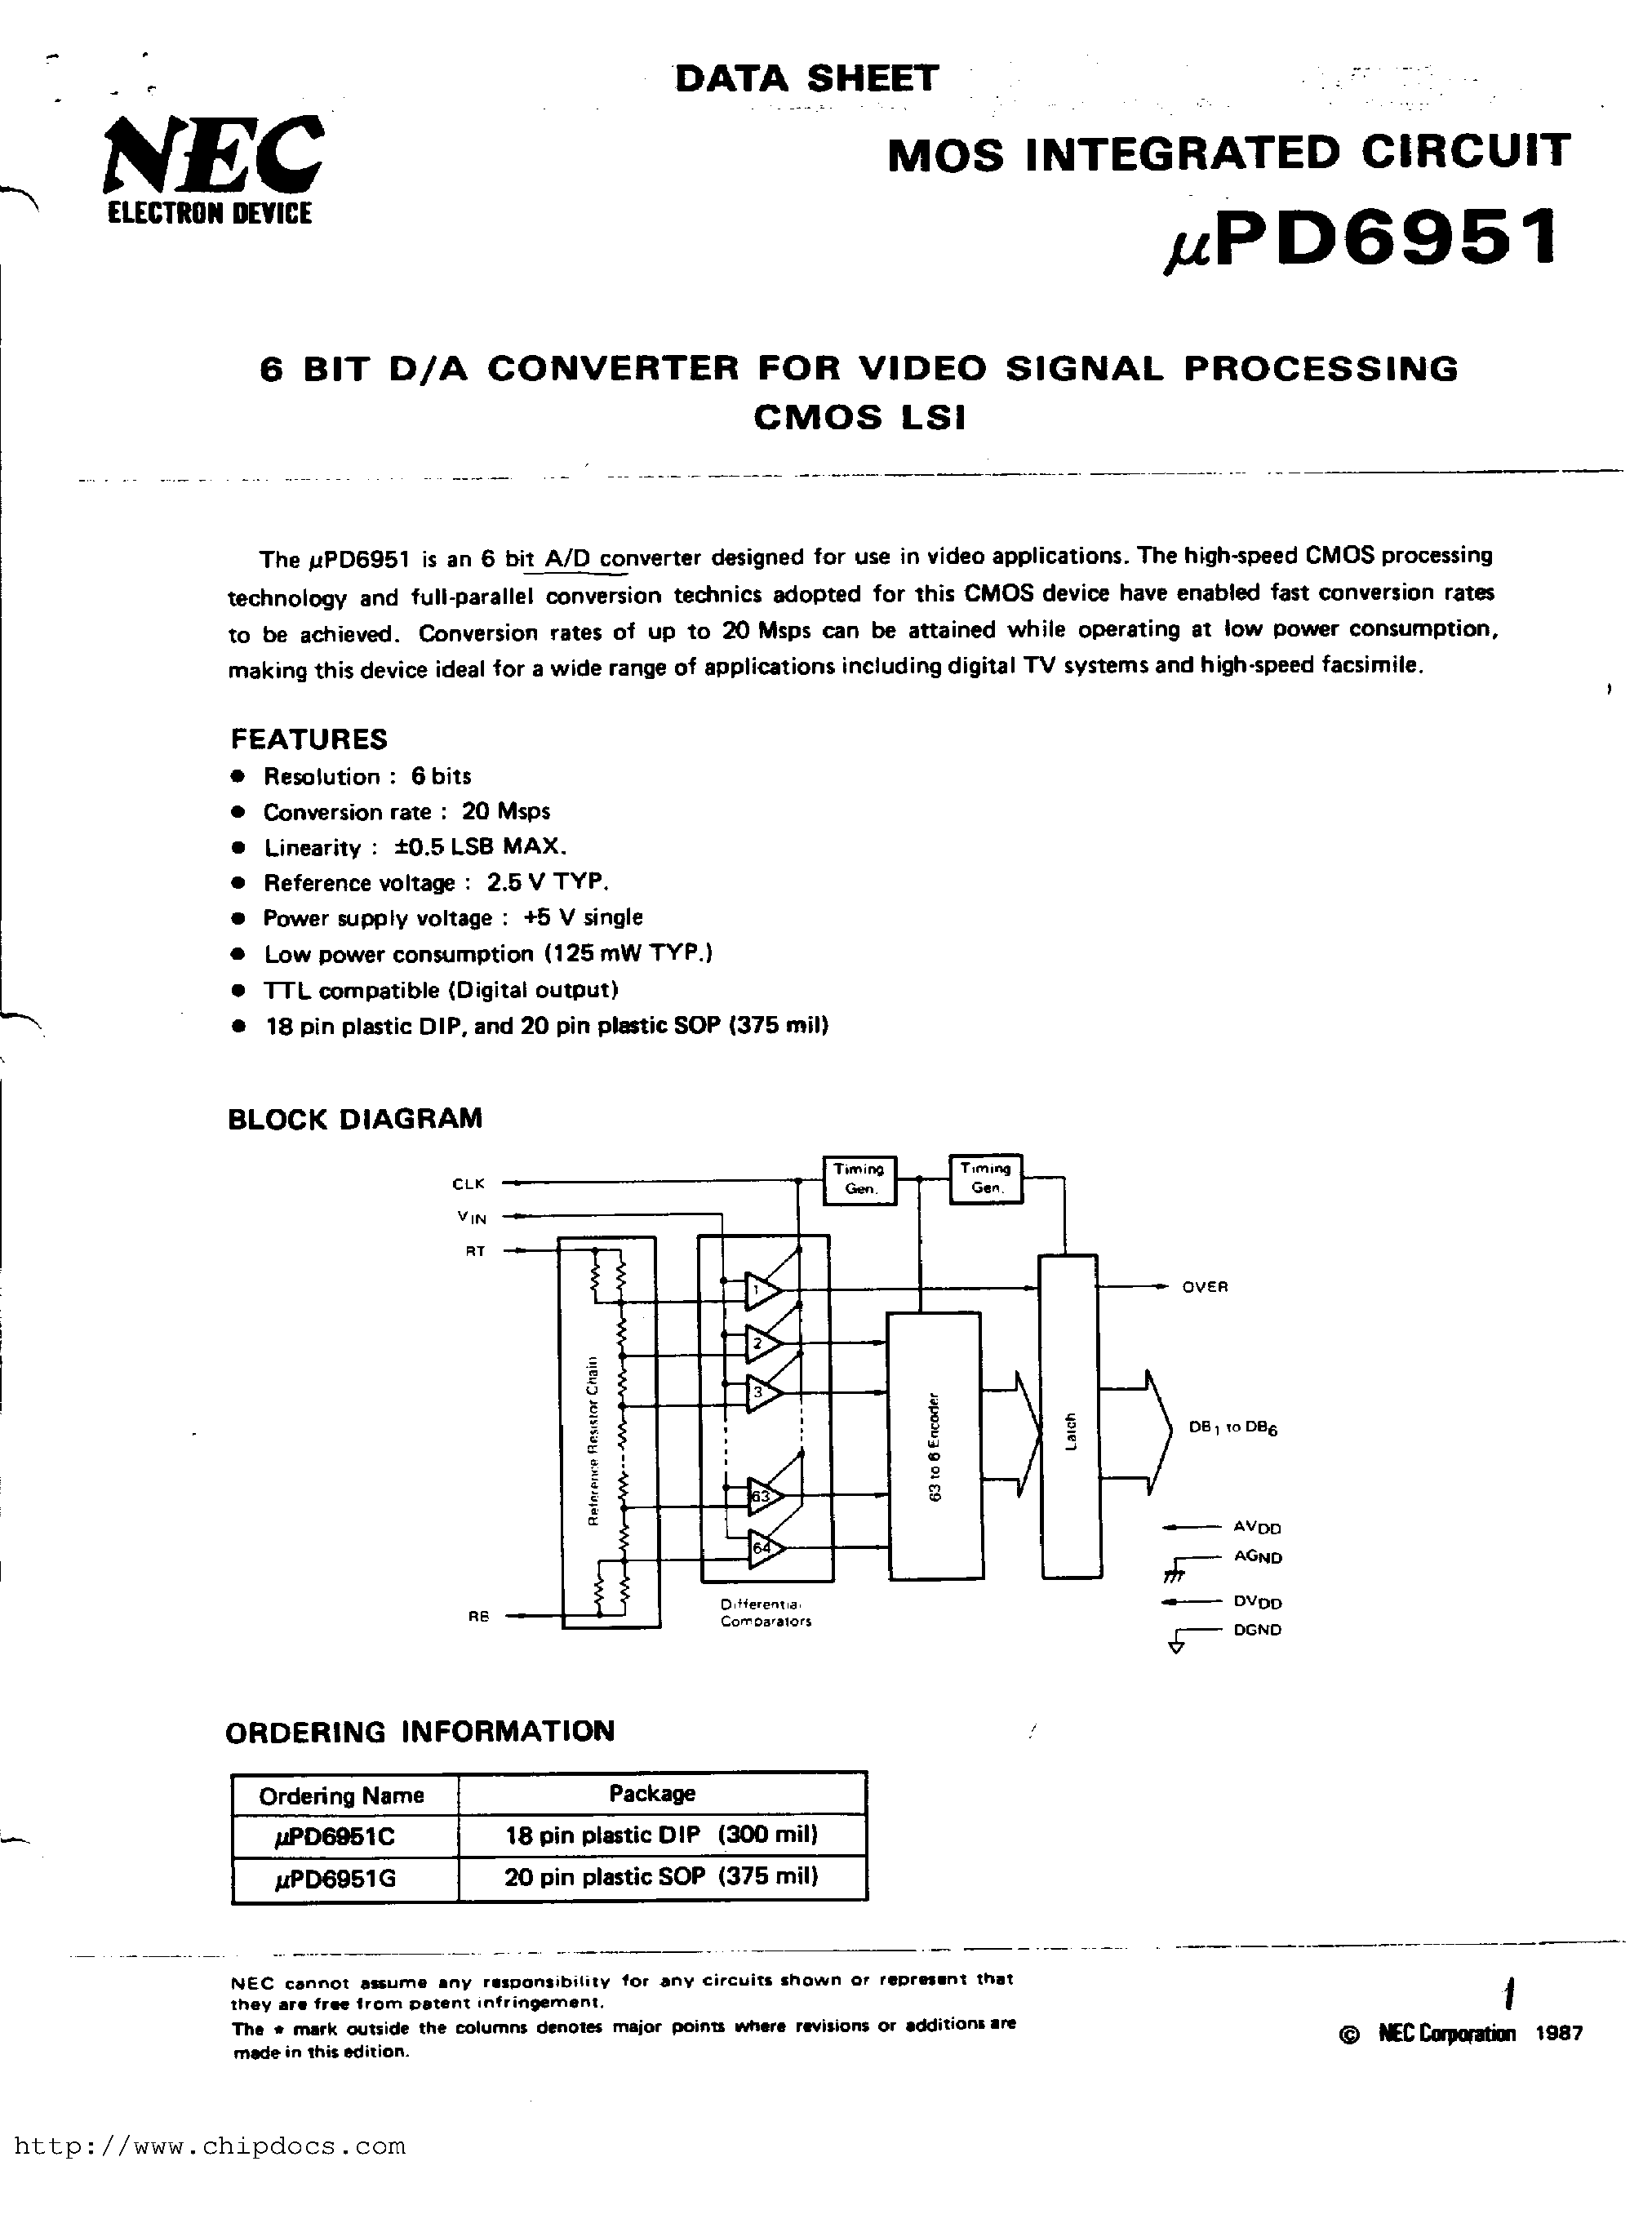 Datasheet UPD6951 - 6 BIT D/A CONVERTER FOR VIDEO SIGNAL PROCESSING CMOS LSI page 1